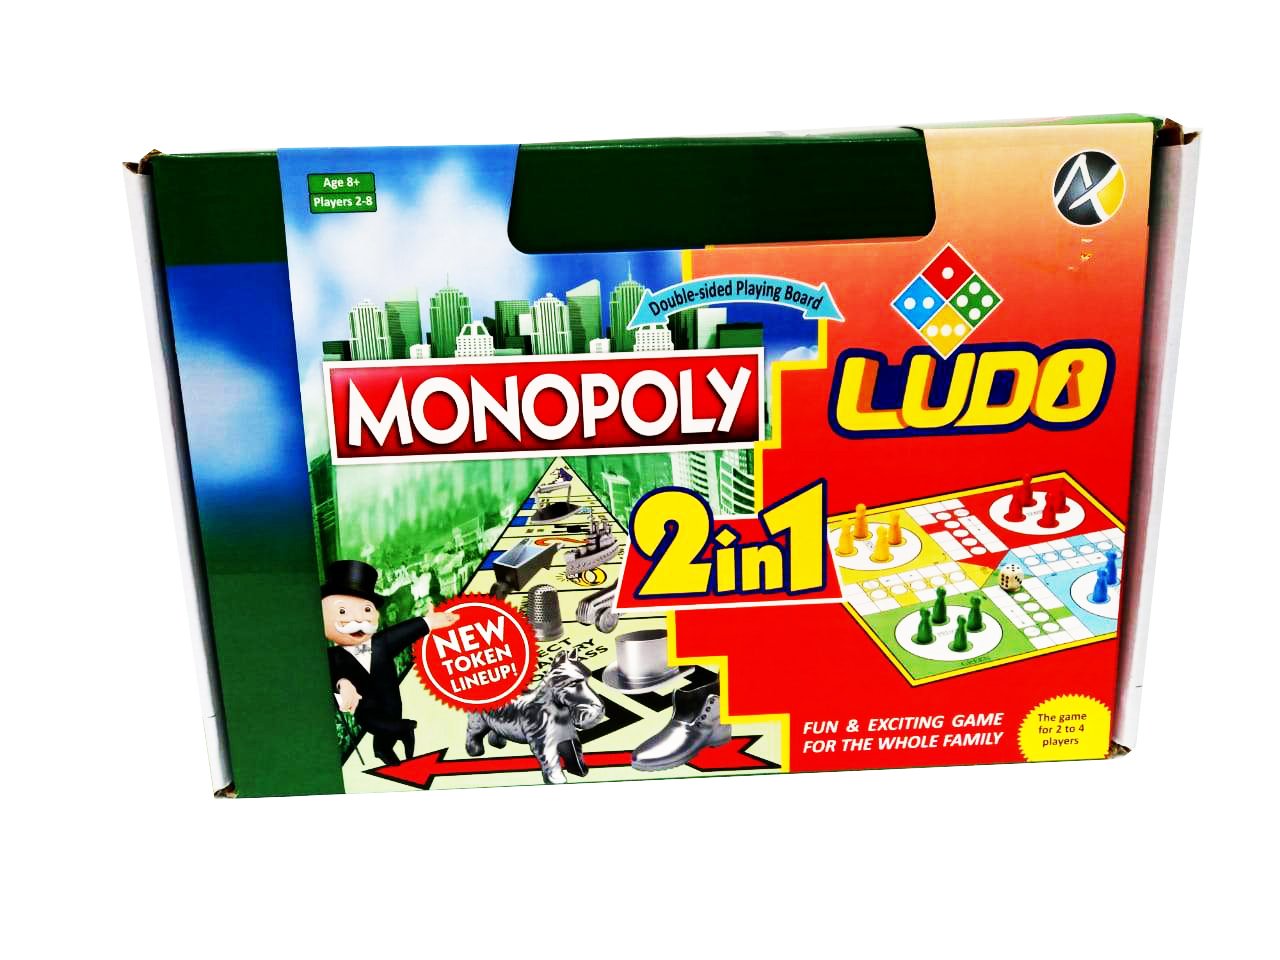 MONOPOLY AND LUDO 2 IN 1 GAME